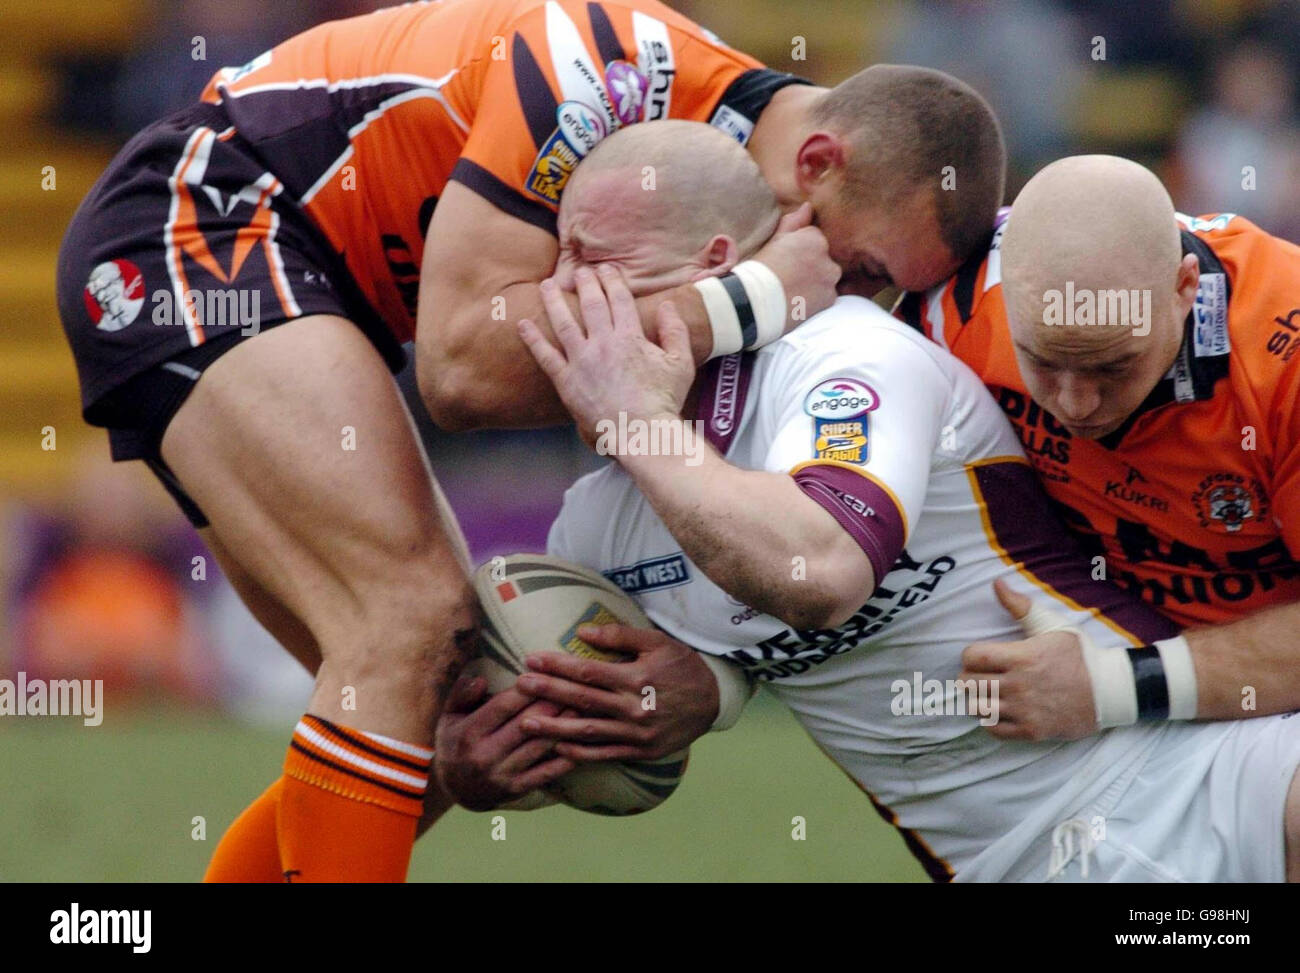 Huddersfield Giants Stuart Dolan is stopped by Castleford's Matt Whittaker and Danny Ward during the Engage Super League match at The Jungle, Castleford, Sunday March 26, 2006. PRESS ASSOCIATION Photo. Photo credit should read: PA. **** Stock Photo